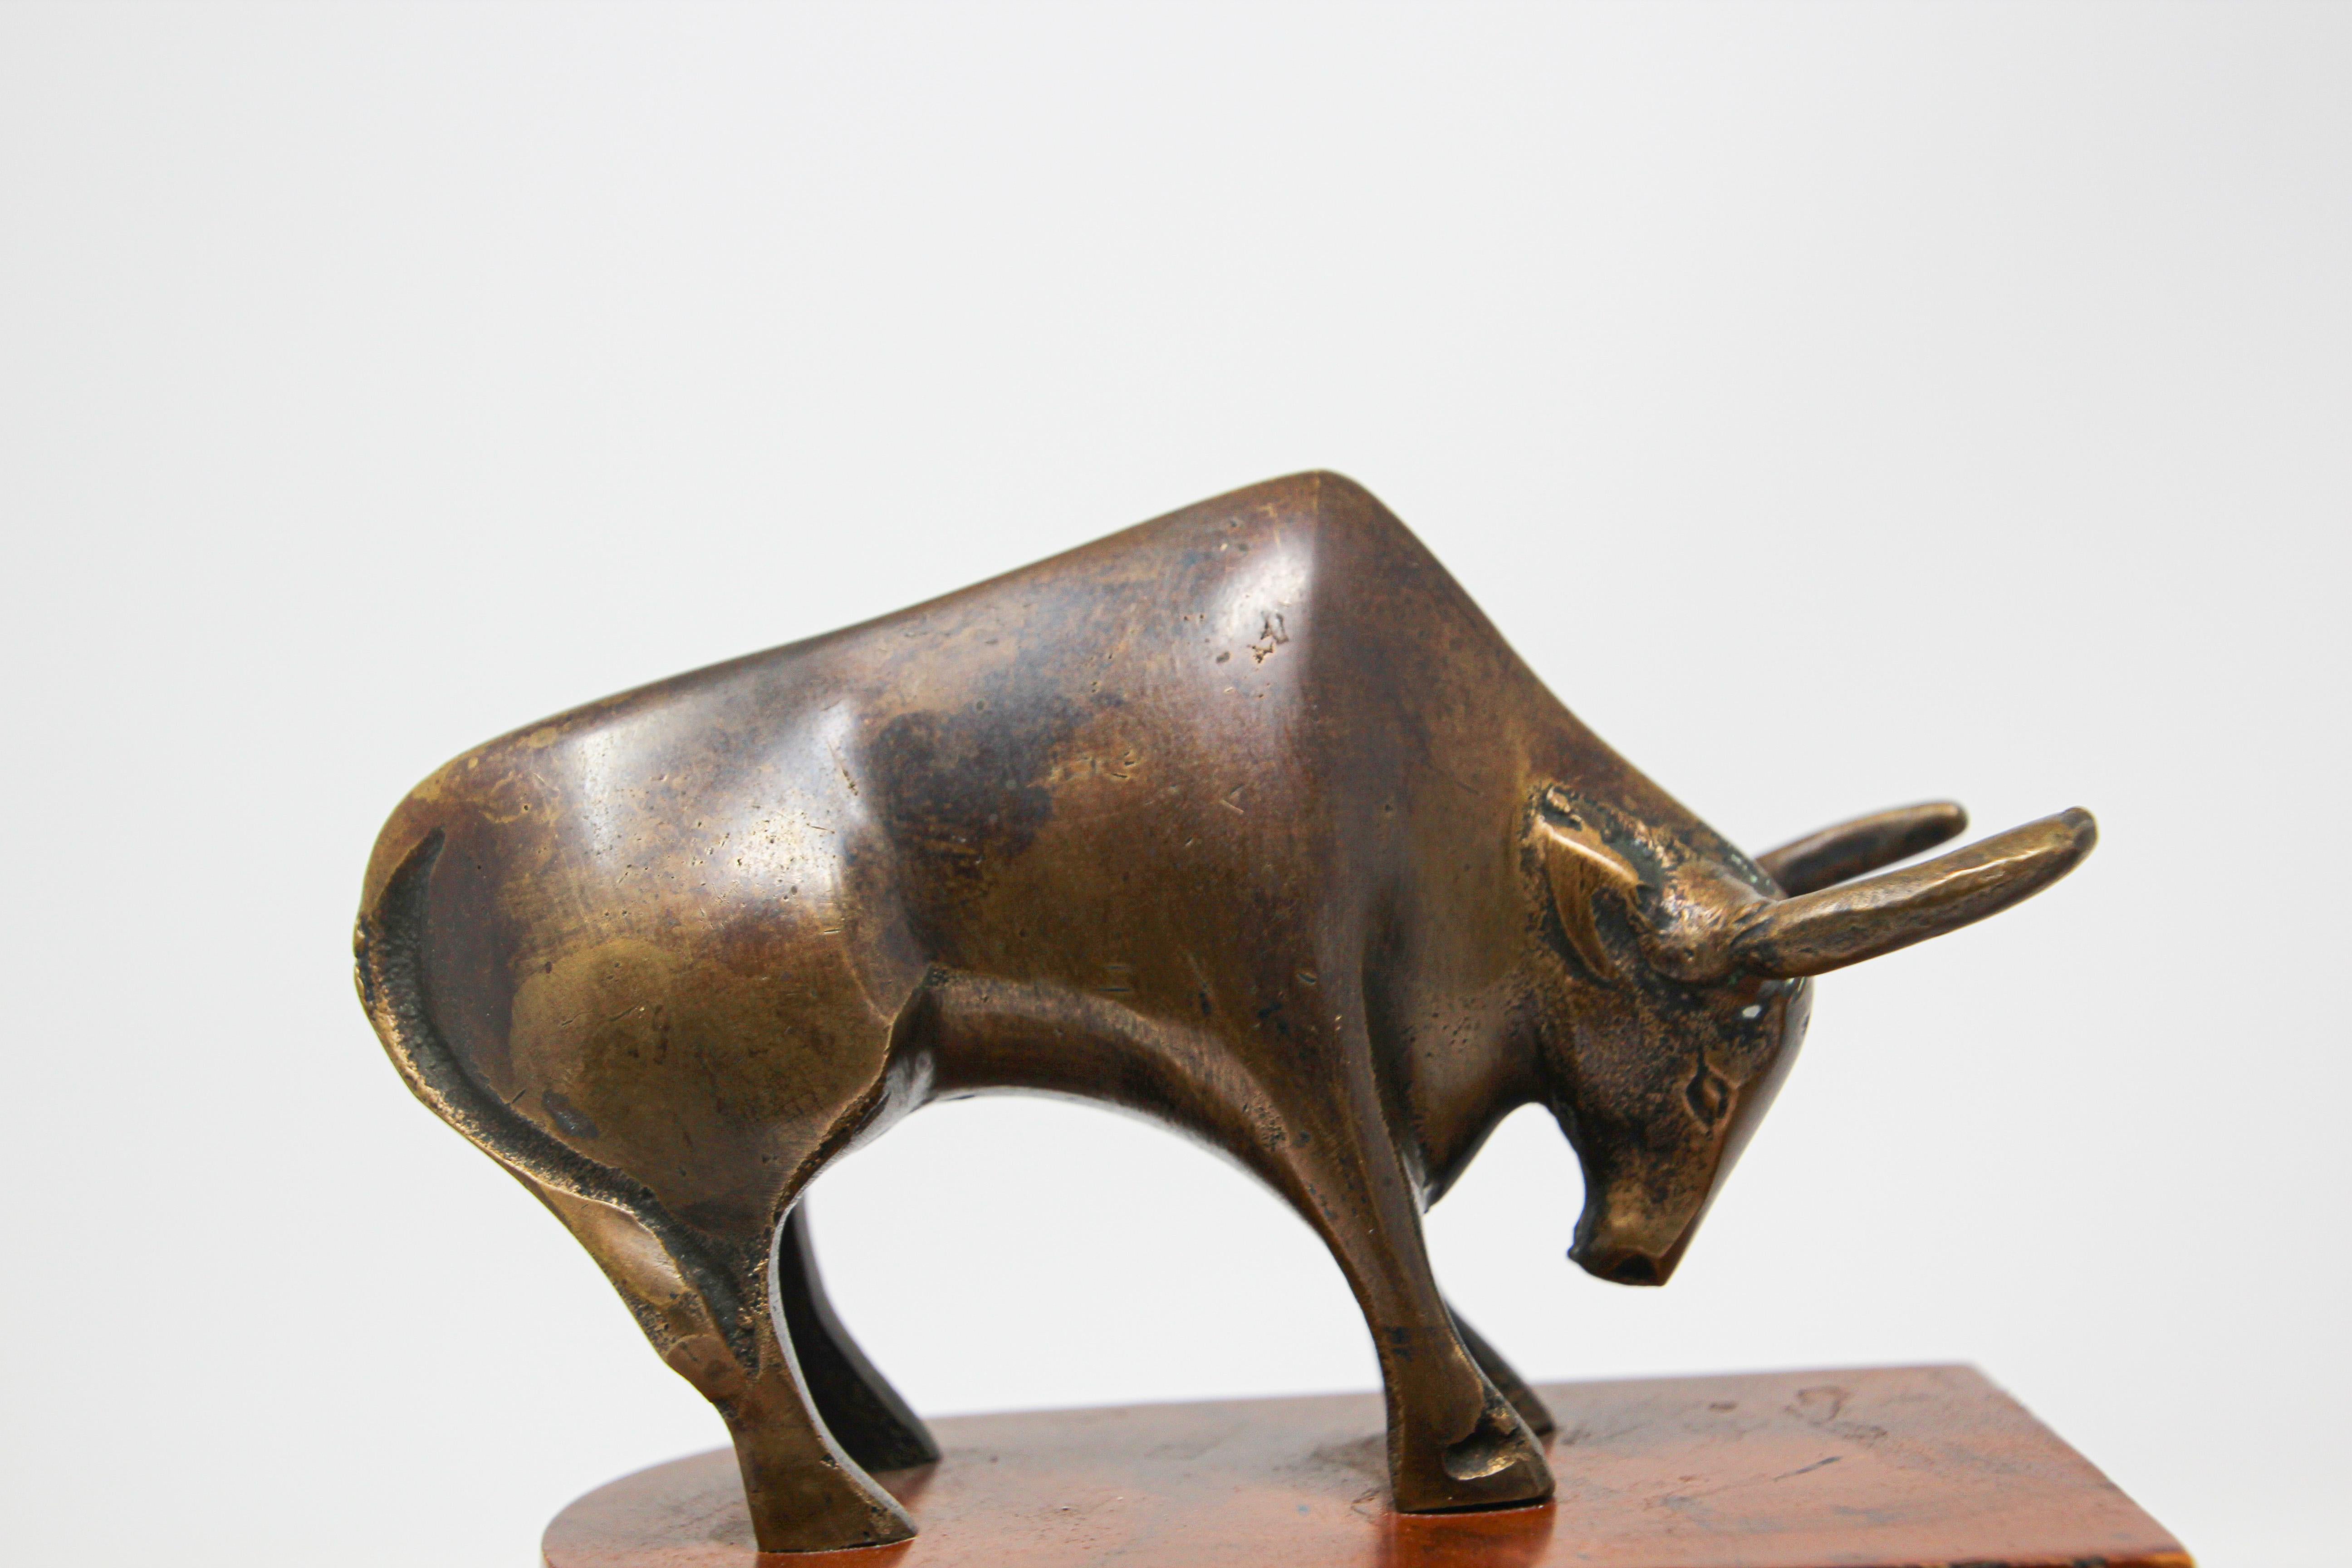 Polished Brass Bull and Bear Bookends Paperweights 2